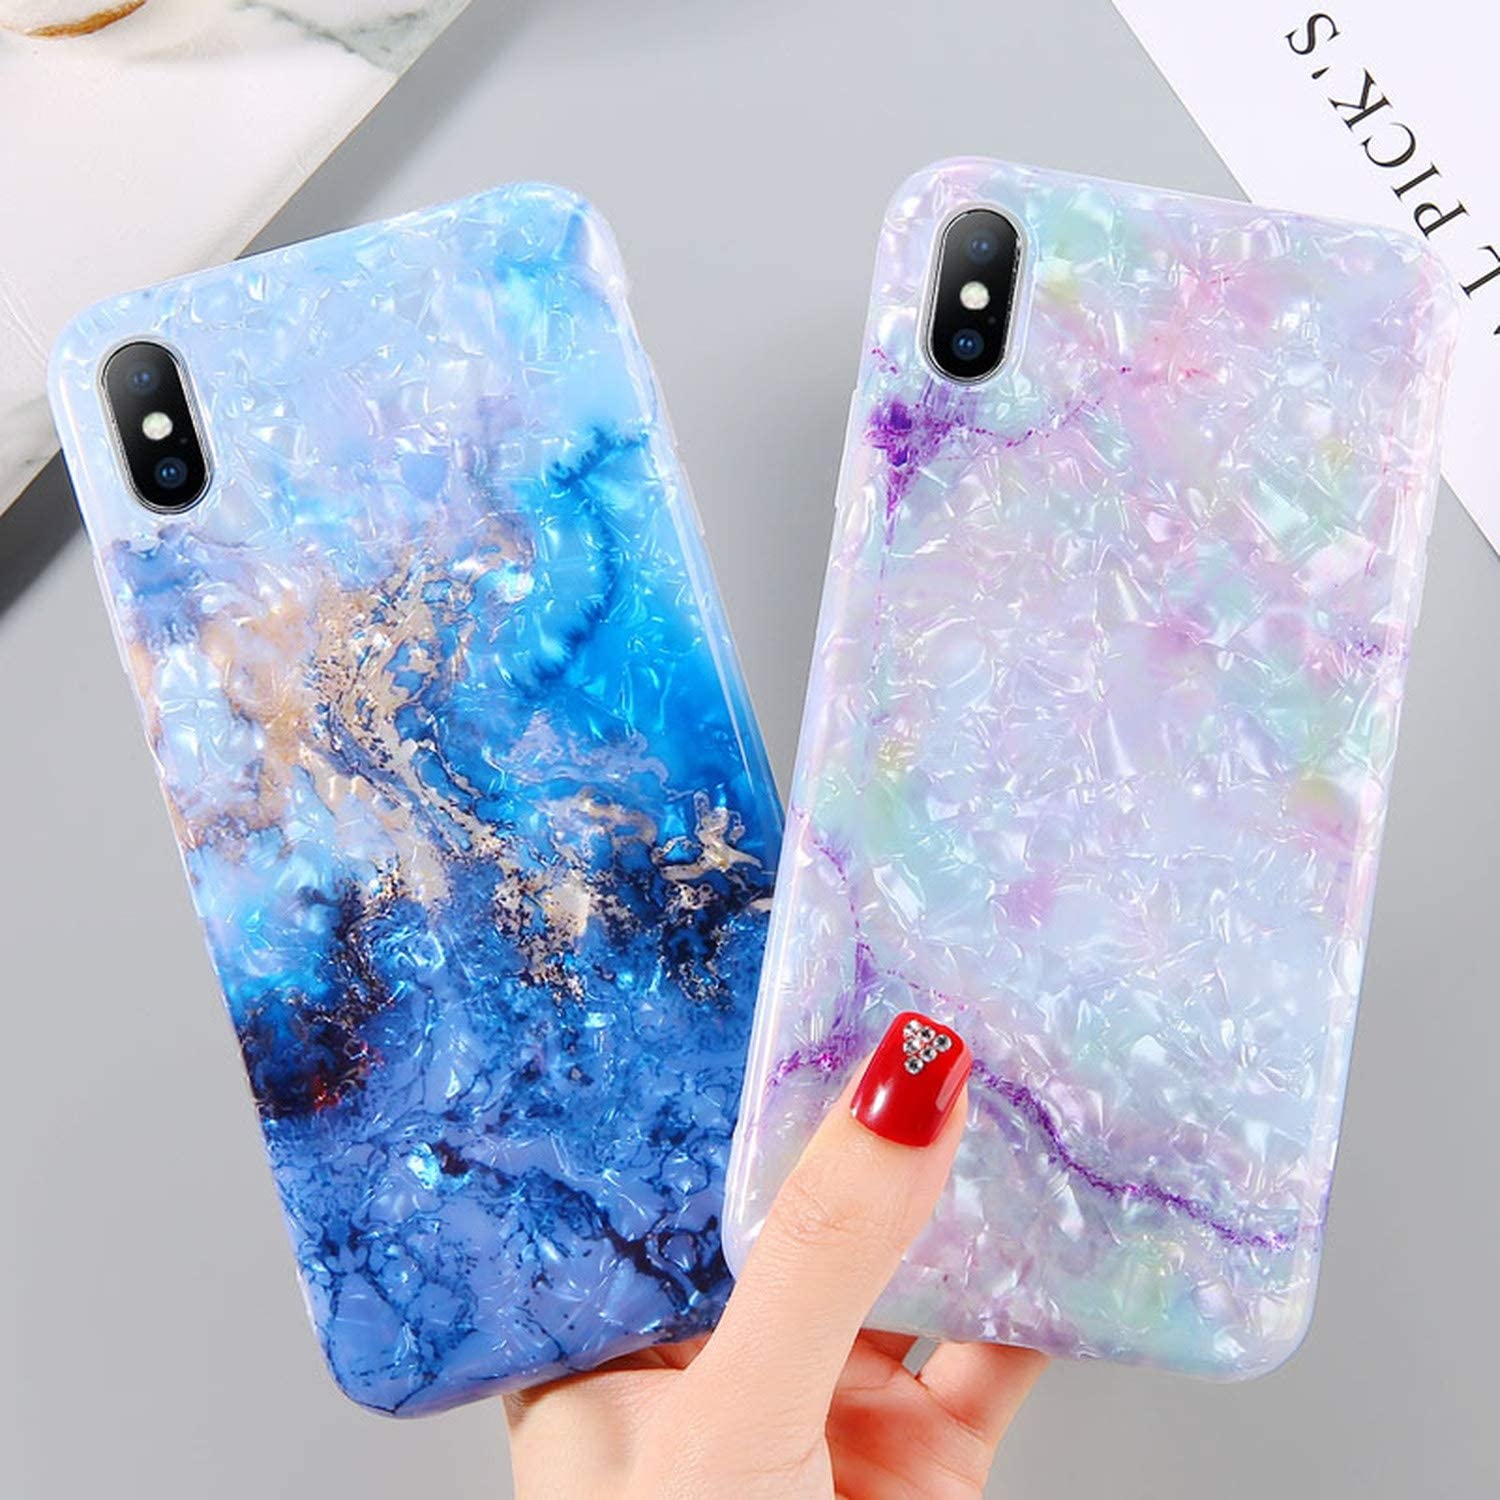 Ksky Qiang Paillettes Marbre Coque pour iPhone XR XS Max X Silicone Dream  Shell Housse pour iPhone 7 8 6 6S Plus Soft TPU Coques for iPhone XS  AC5918